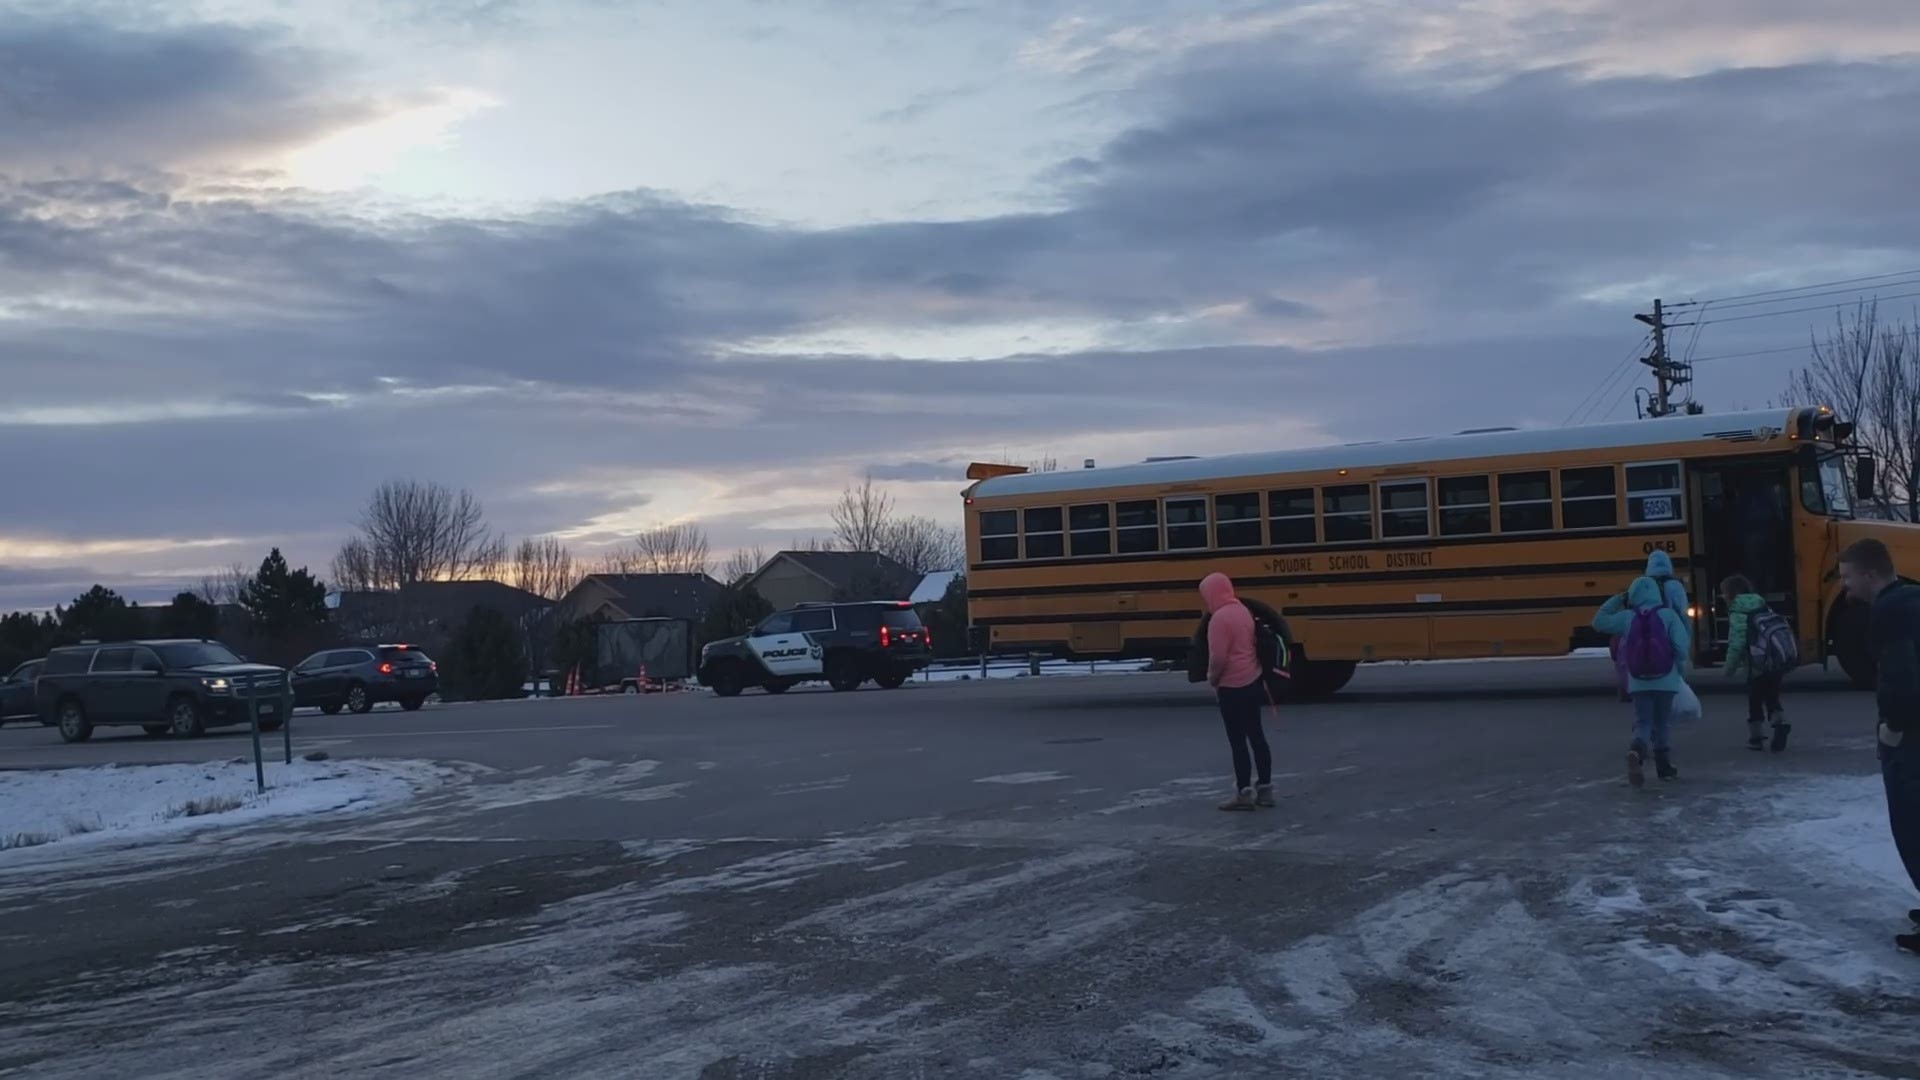 Video taken by Brittany Ramos Wednesday morning shows a CSU police vehicle failing to stop for a school bus. The department said they're looking into the incident.